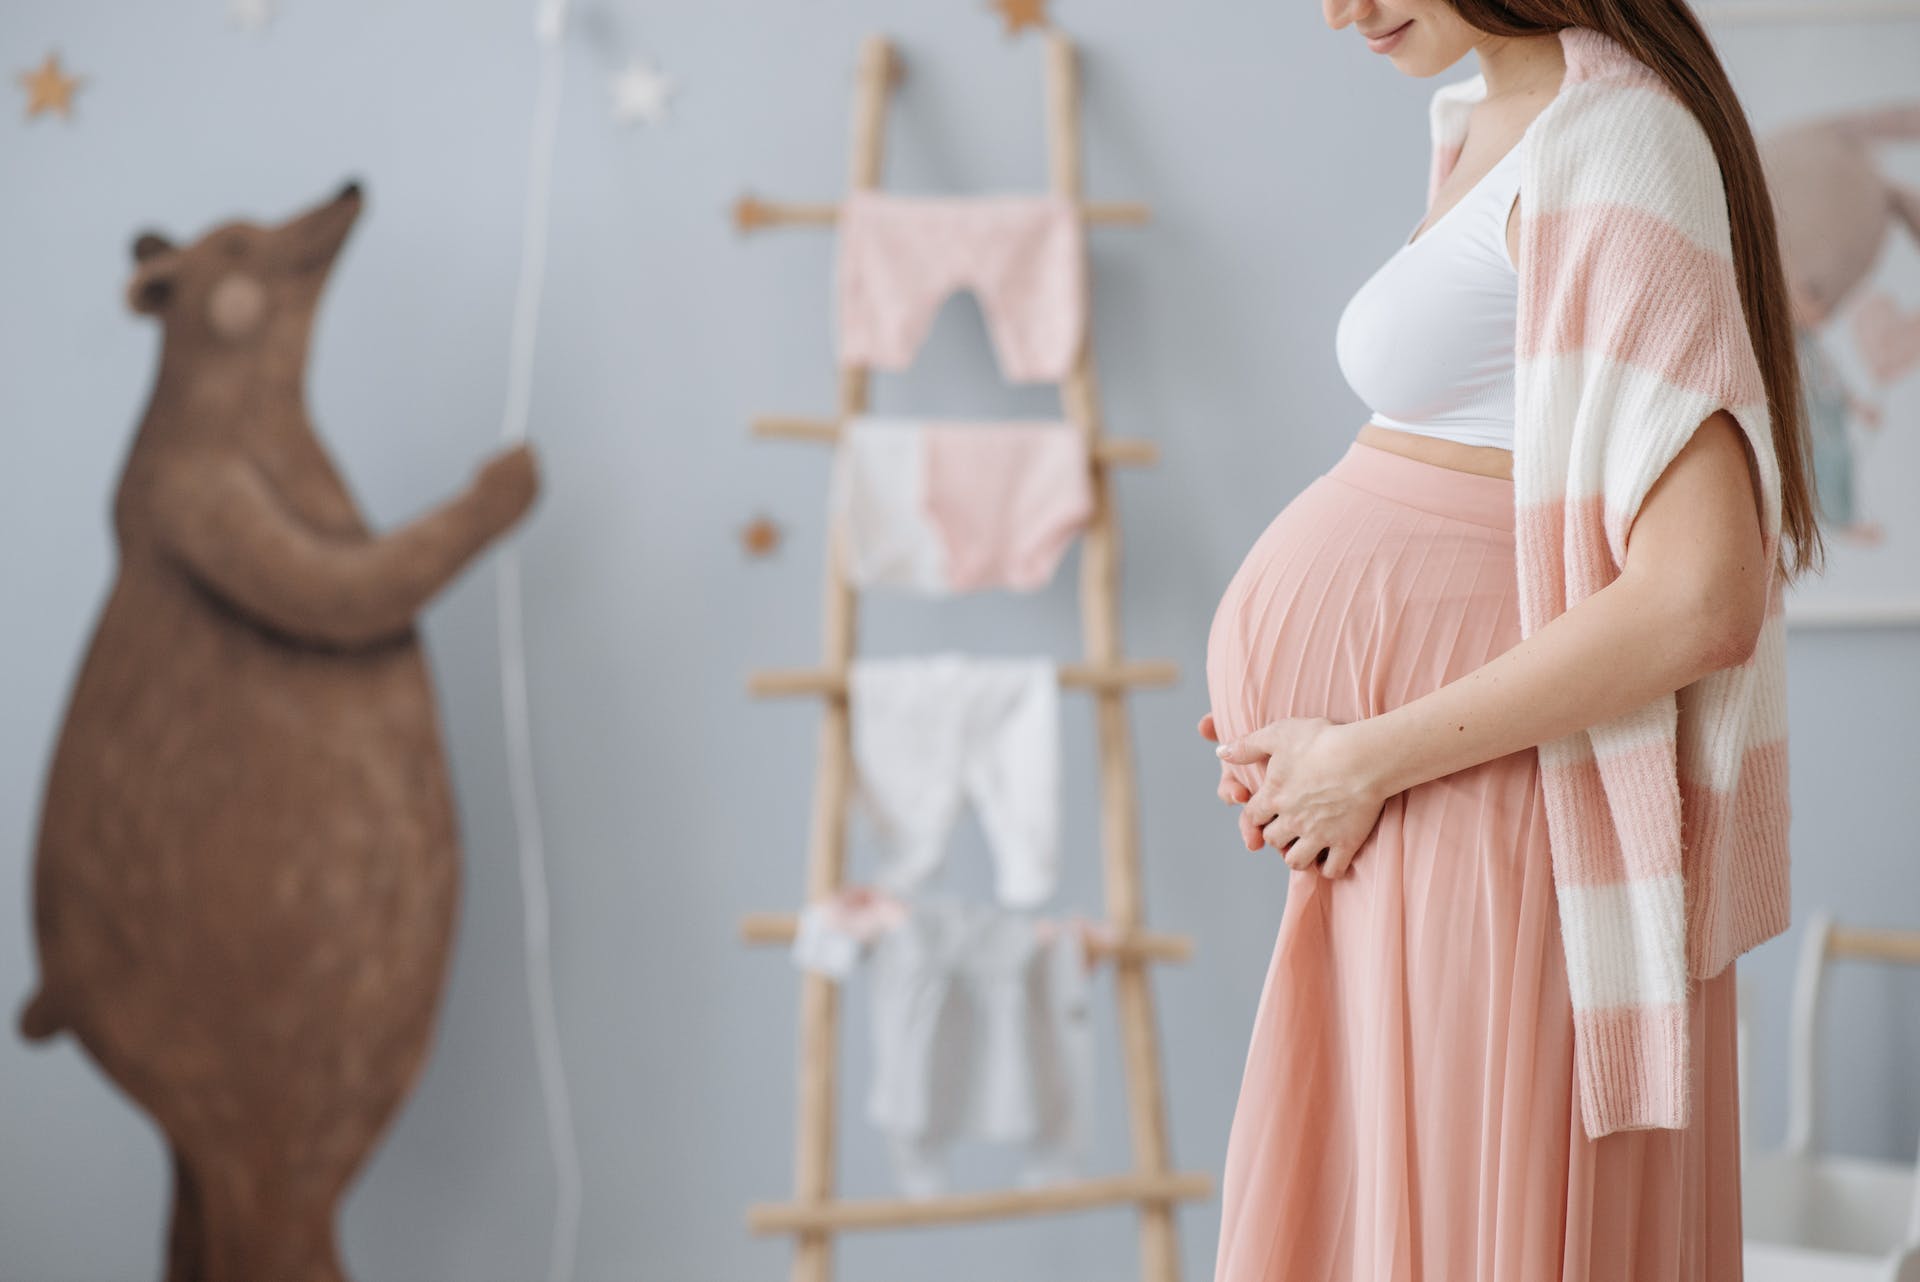 Pregnant woman holding her belly | Source: Pexels